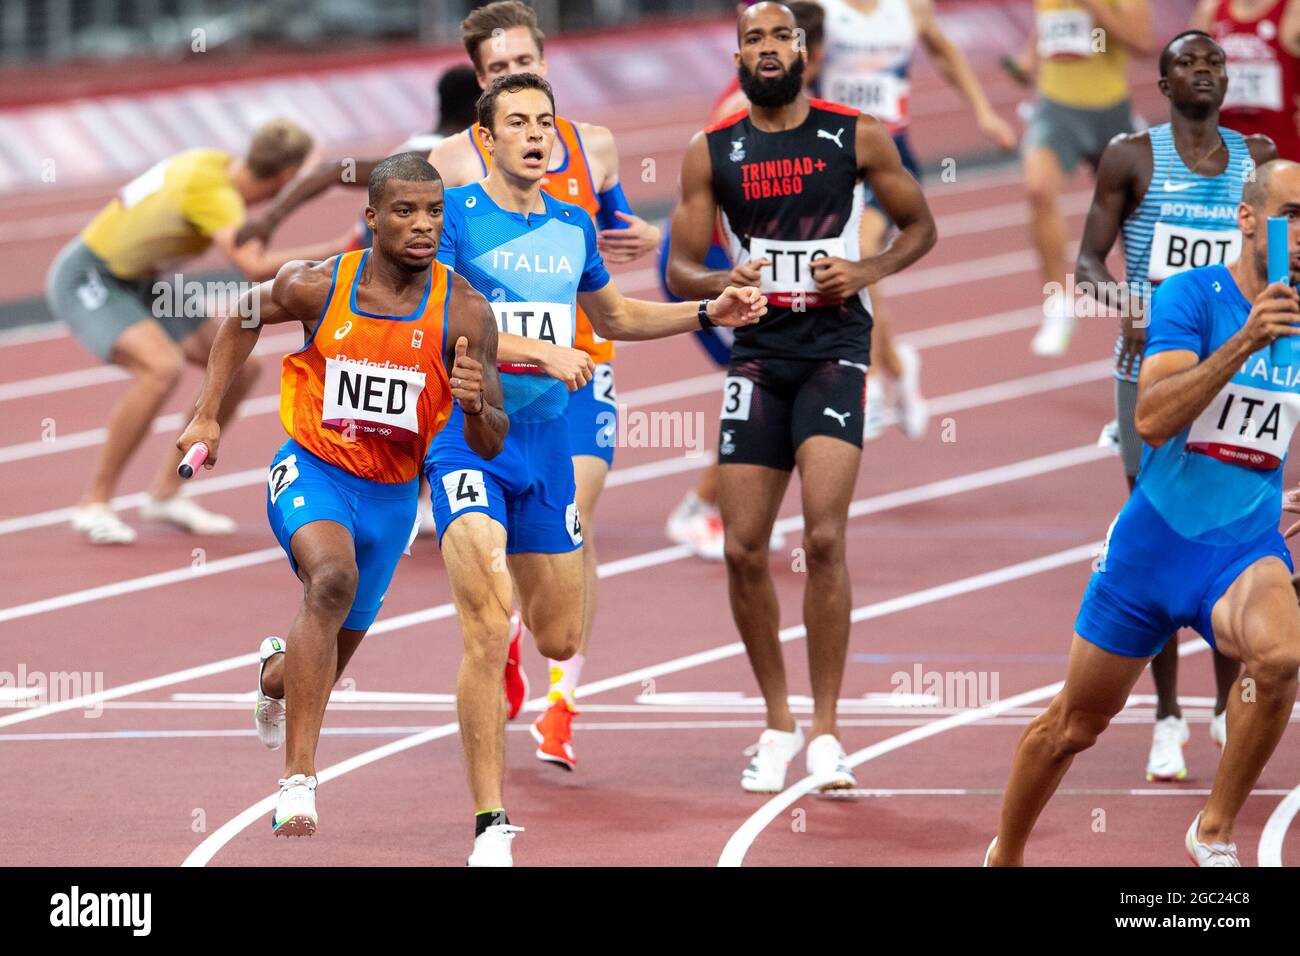 Tokyo, Japan. 06th Aug, 2021. TOKYO, JAPAN - AUGUST 6: competing on Men's Long Jump - Qualification during the Tokyo 2020 Olympic Games at the Olympic Stadium on August 6, 2021 in Tokyo, Japan (Photo by Andy Astfalck/Orange Pictures) NOCNSF ATLETIEKUNIE Credit: Orange Pics BV/Alamy Live News Stock Photo